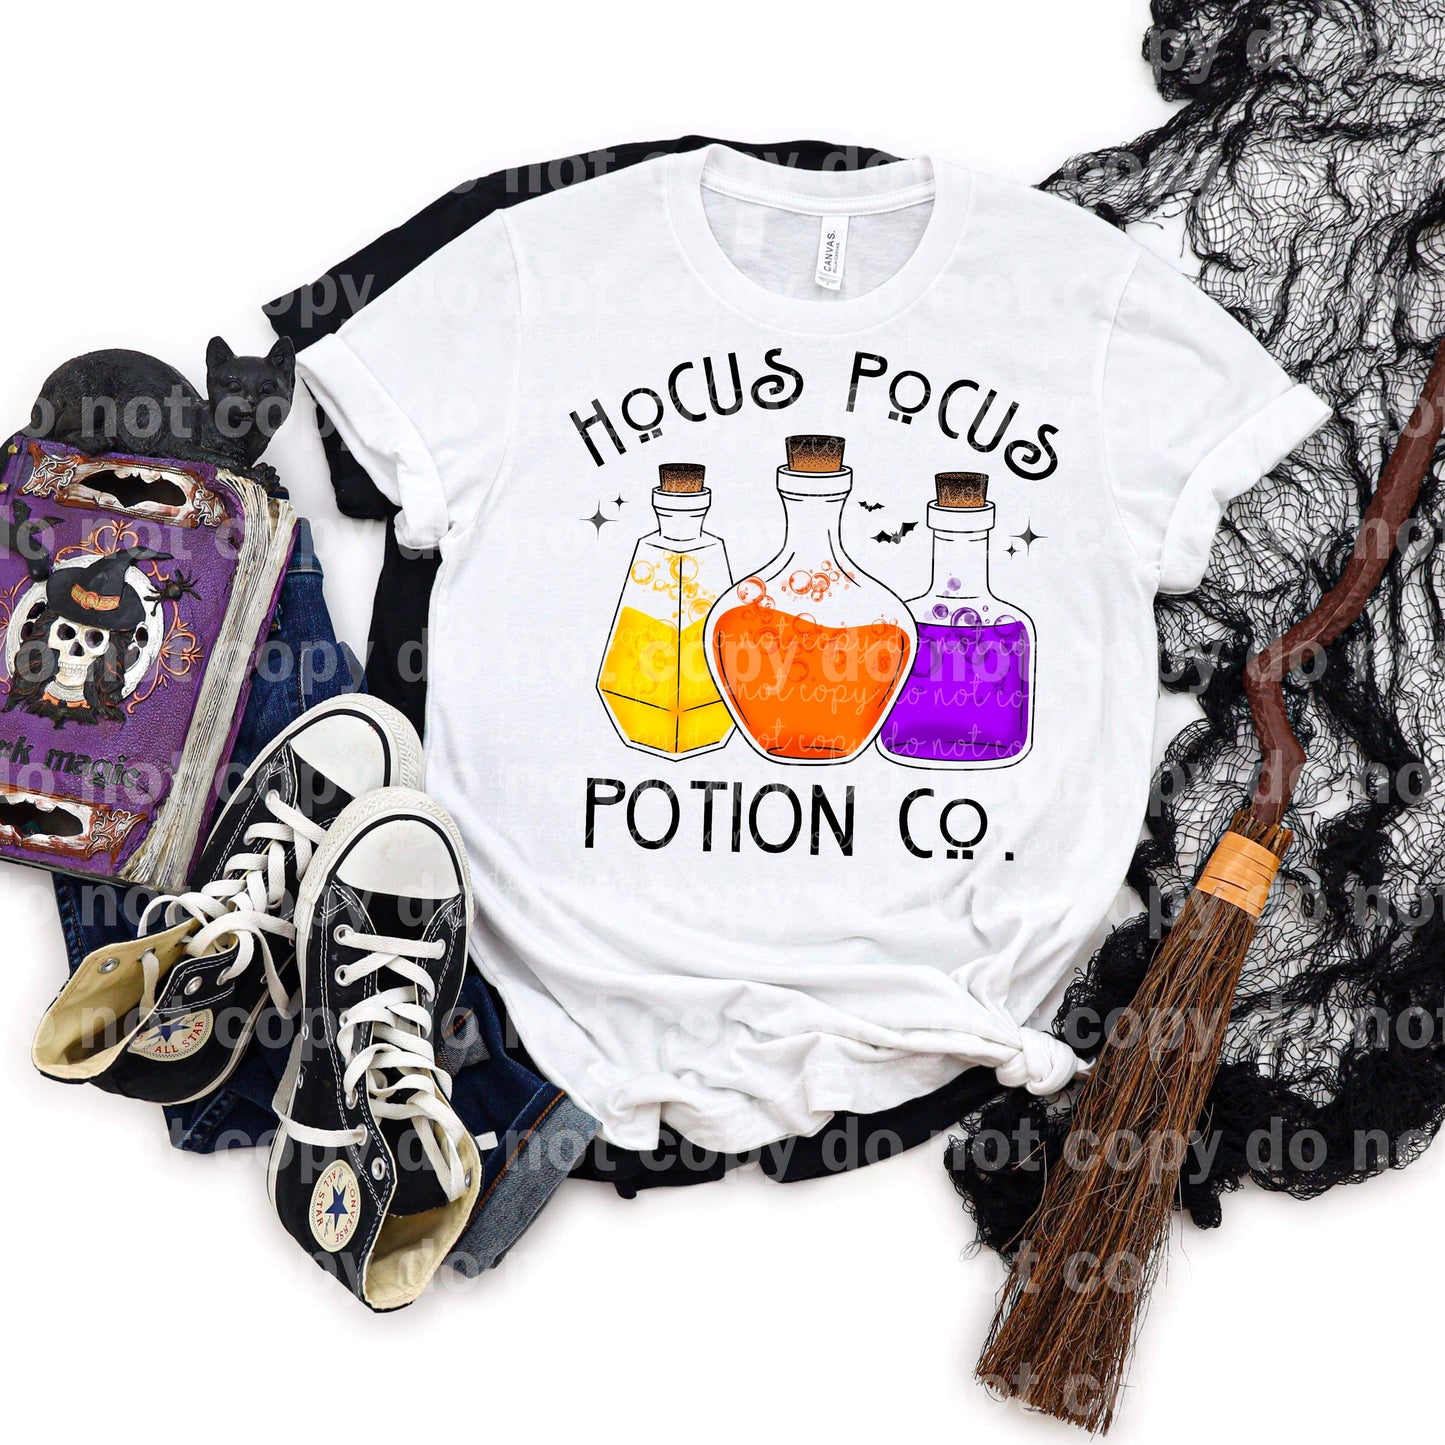 HP Potion Co. Full Color/One Color Dream Print or Sublimation Print